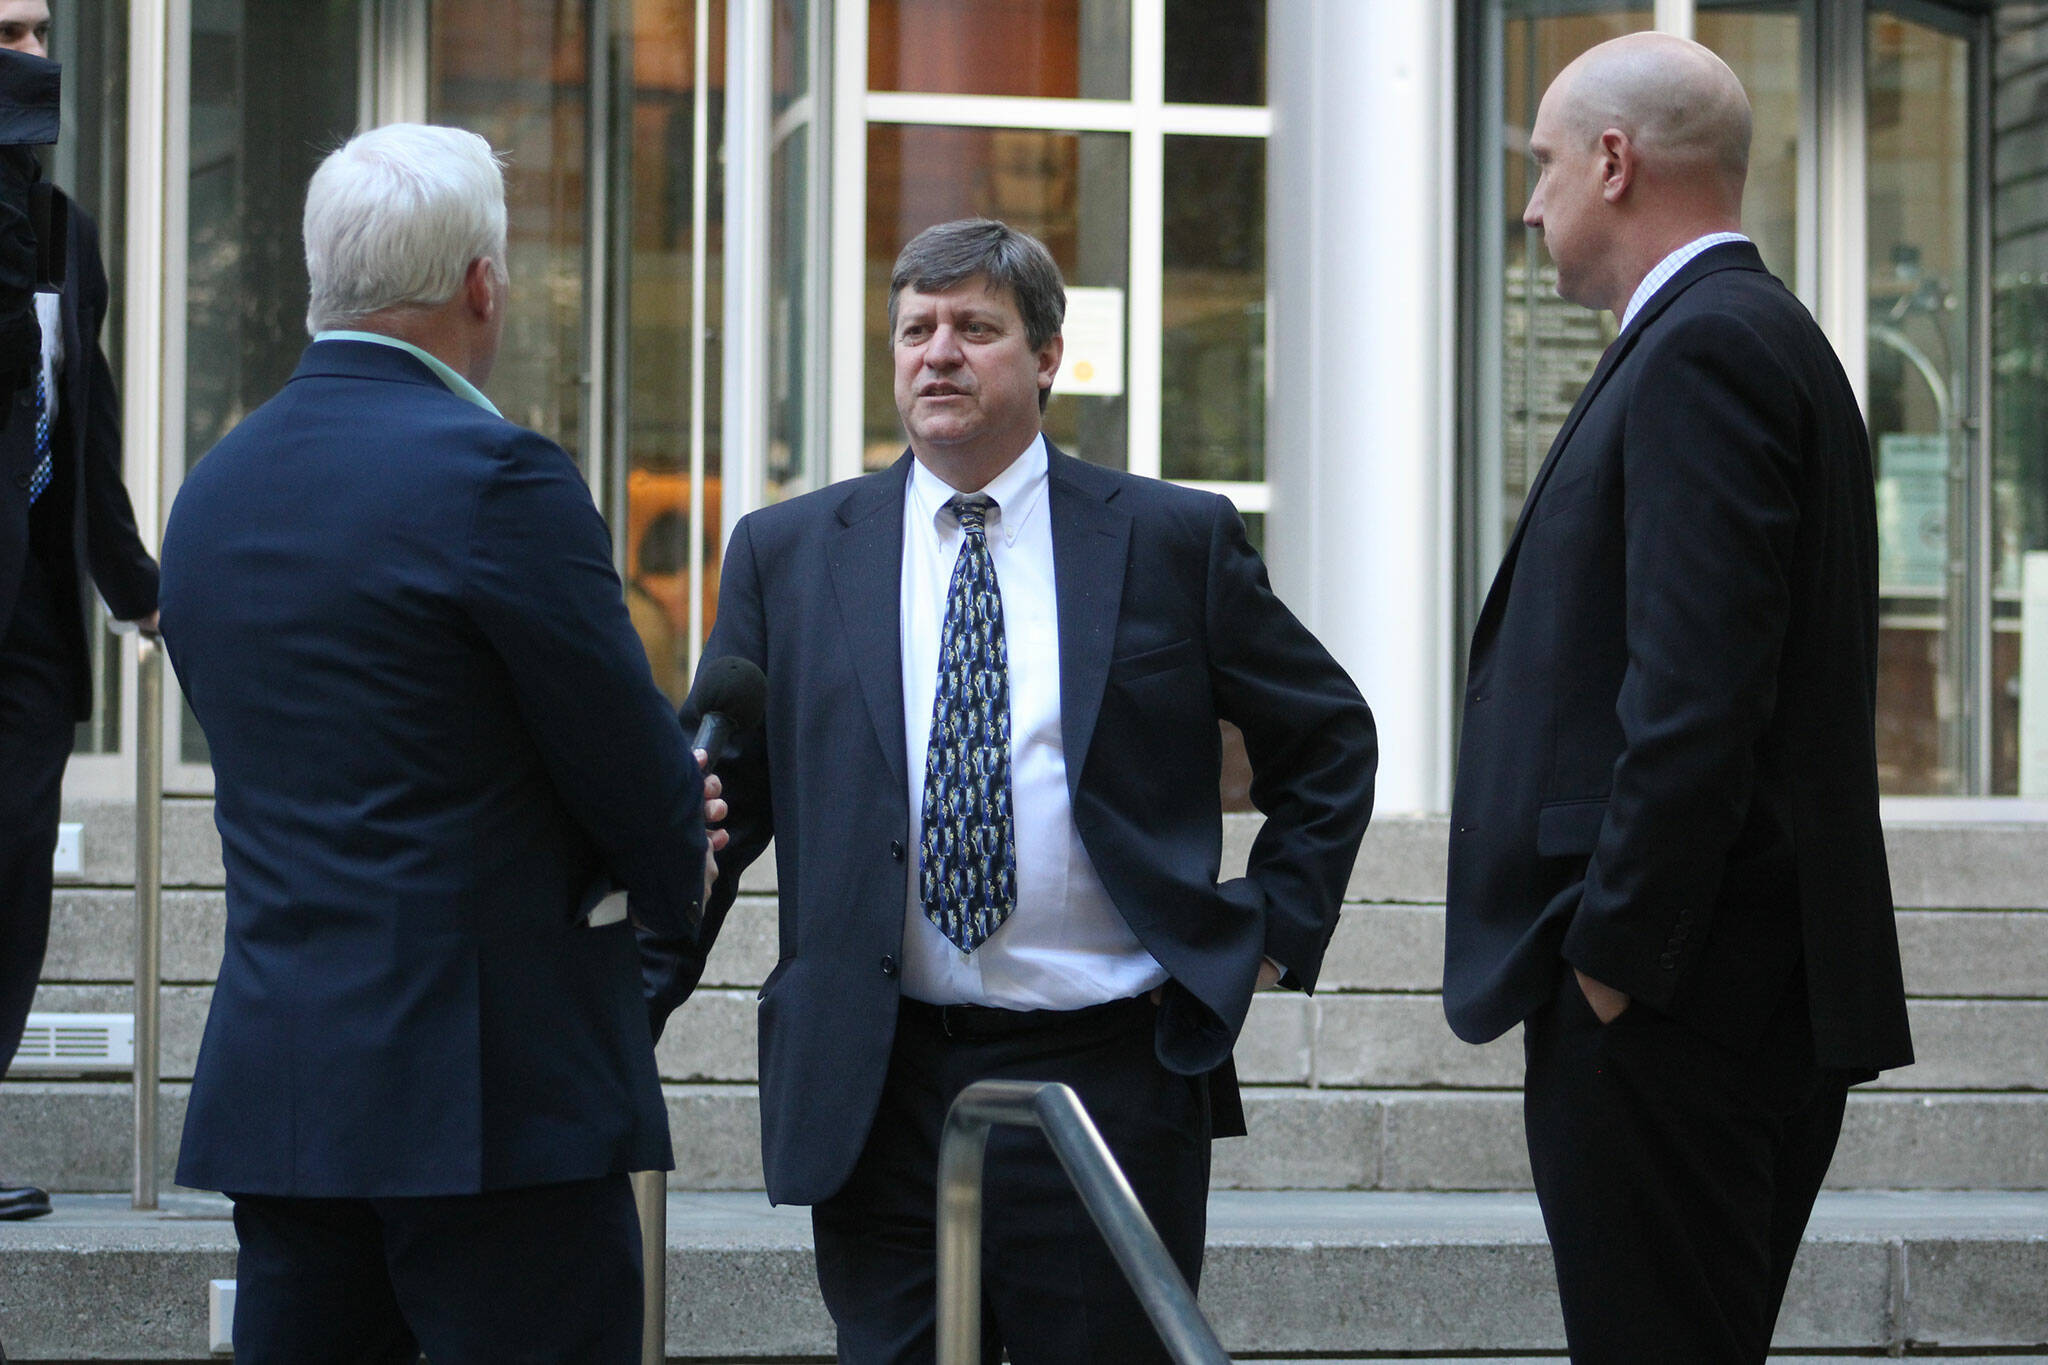 Attorneys for the United States debrief outside the U.S. District Court building in Seattle following the end of the Joann and Allan Thomas trial. Photo by Ray Miller-Still